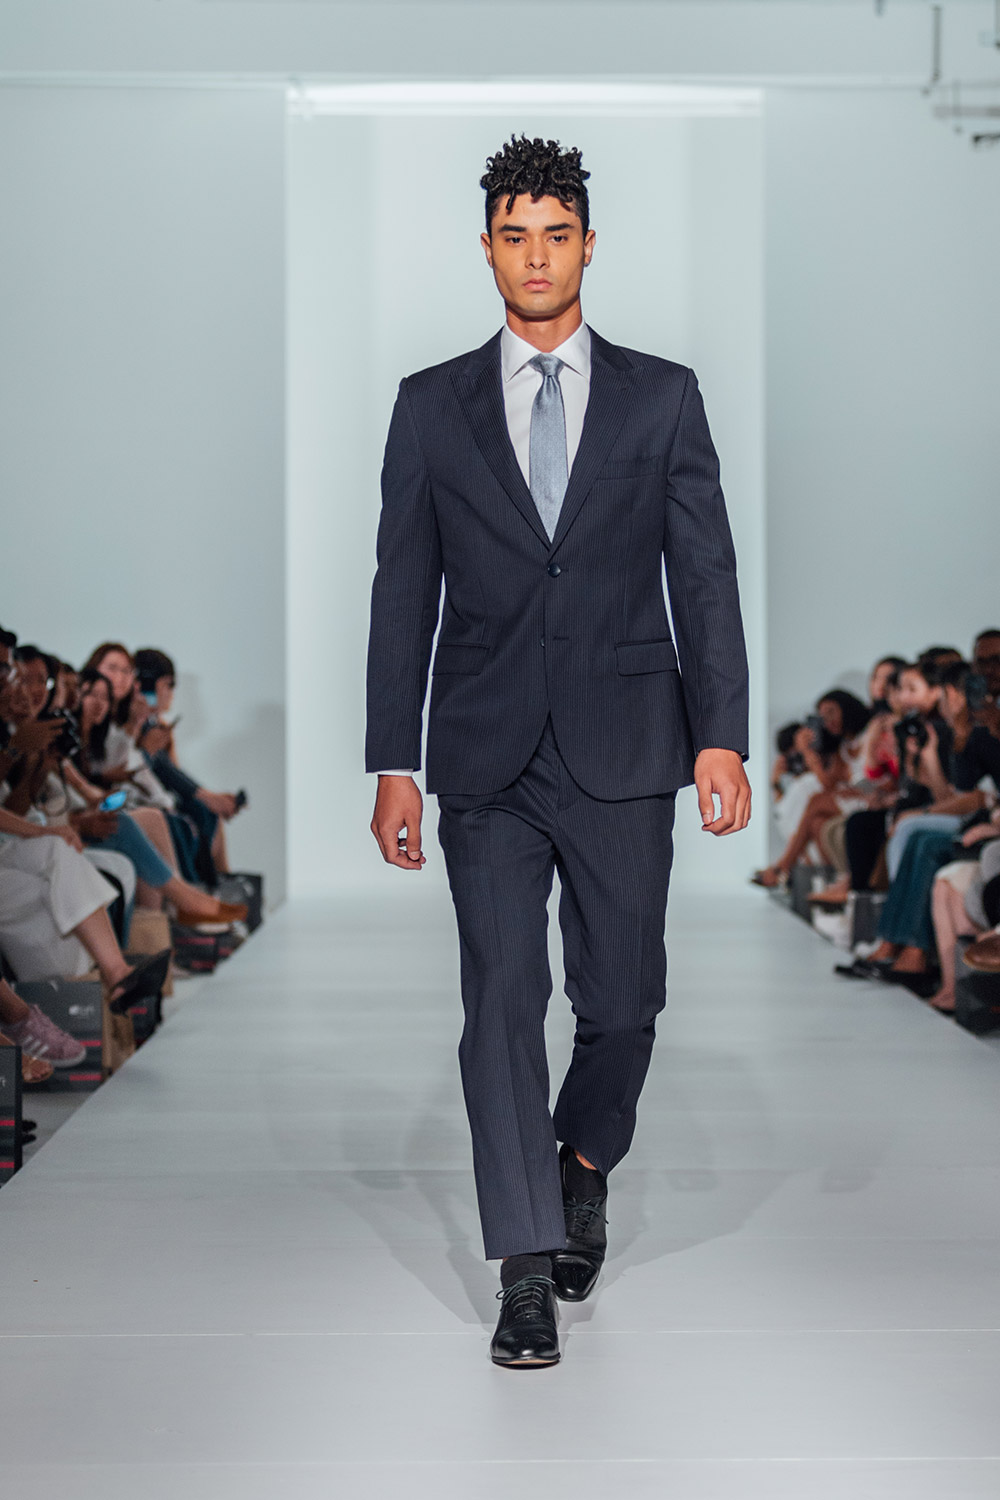 Sacoor Brothers Fall 2019 Collection at WAF2019. www.theweddingnotebook.com